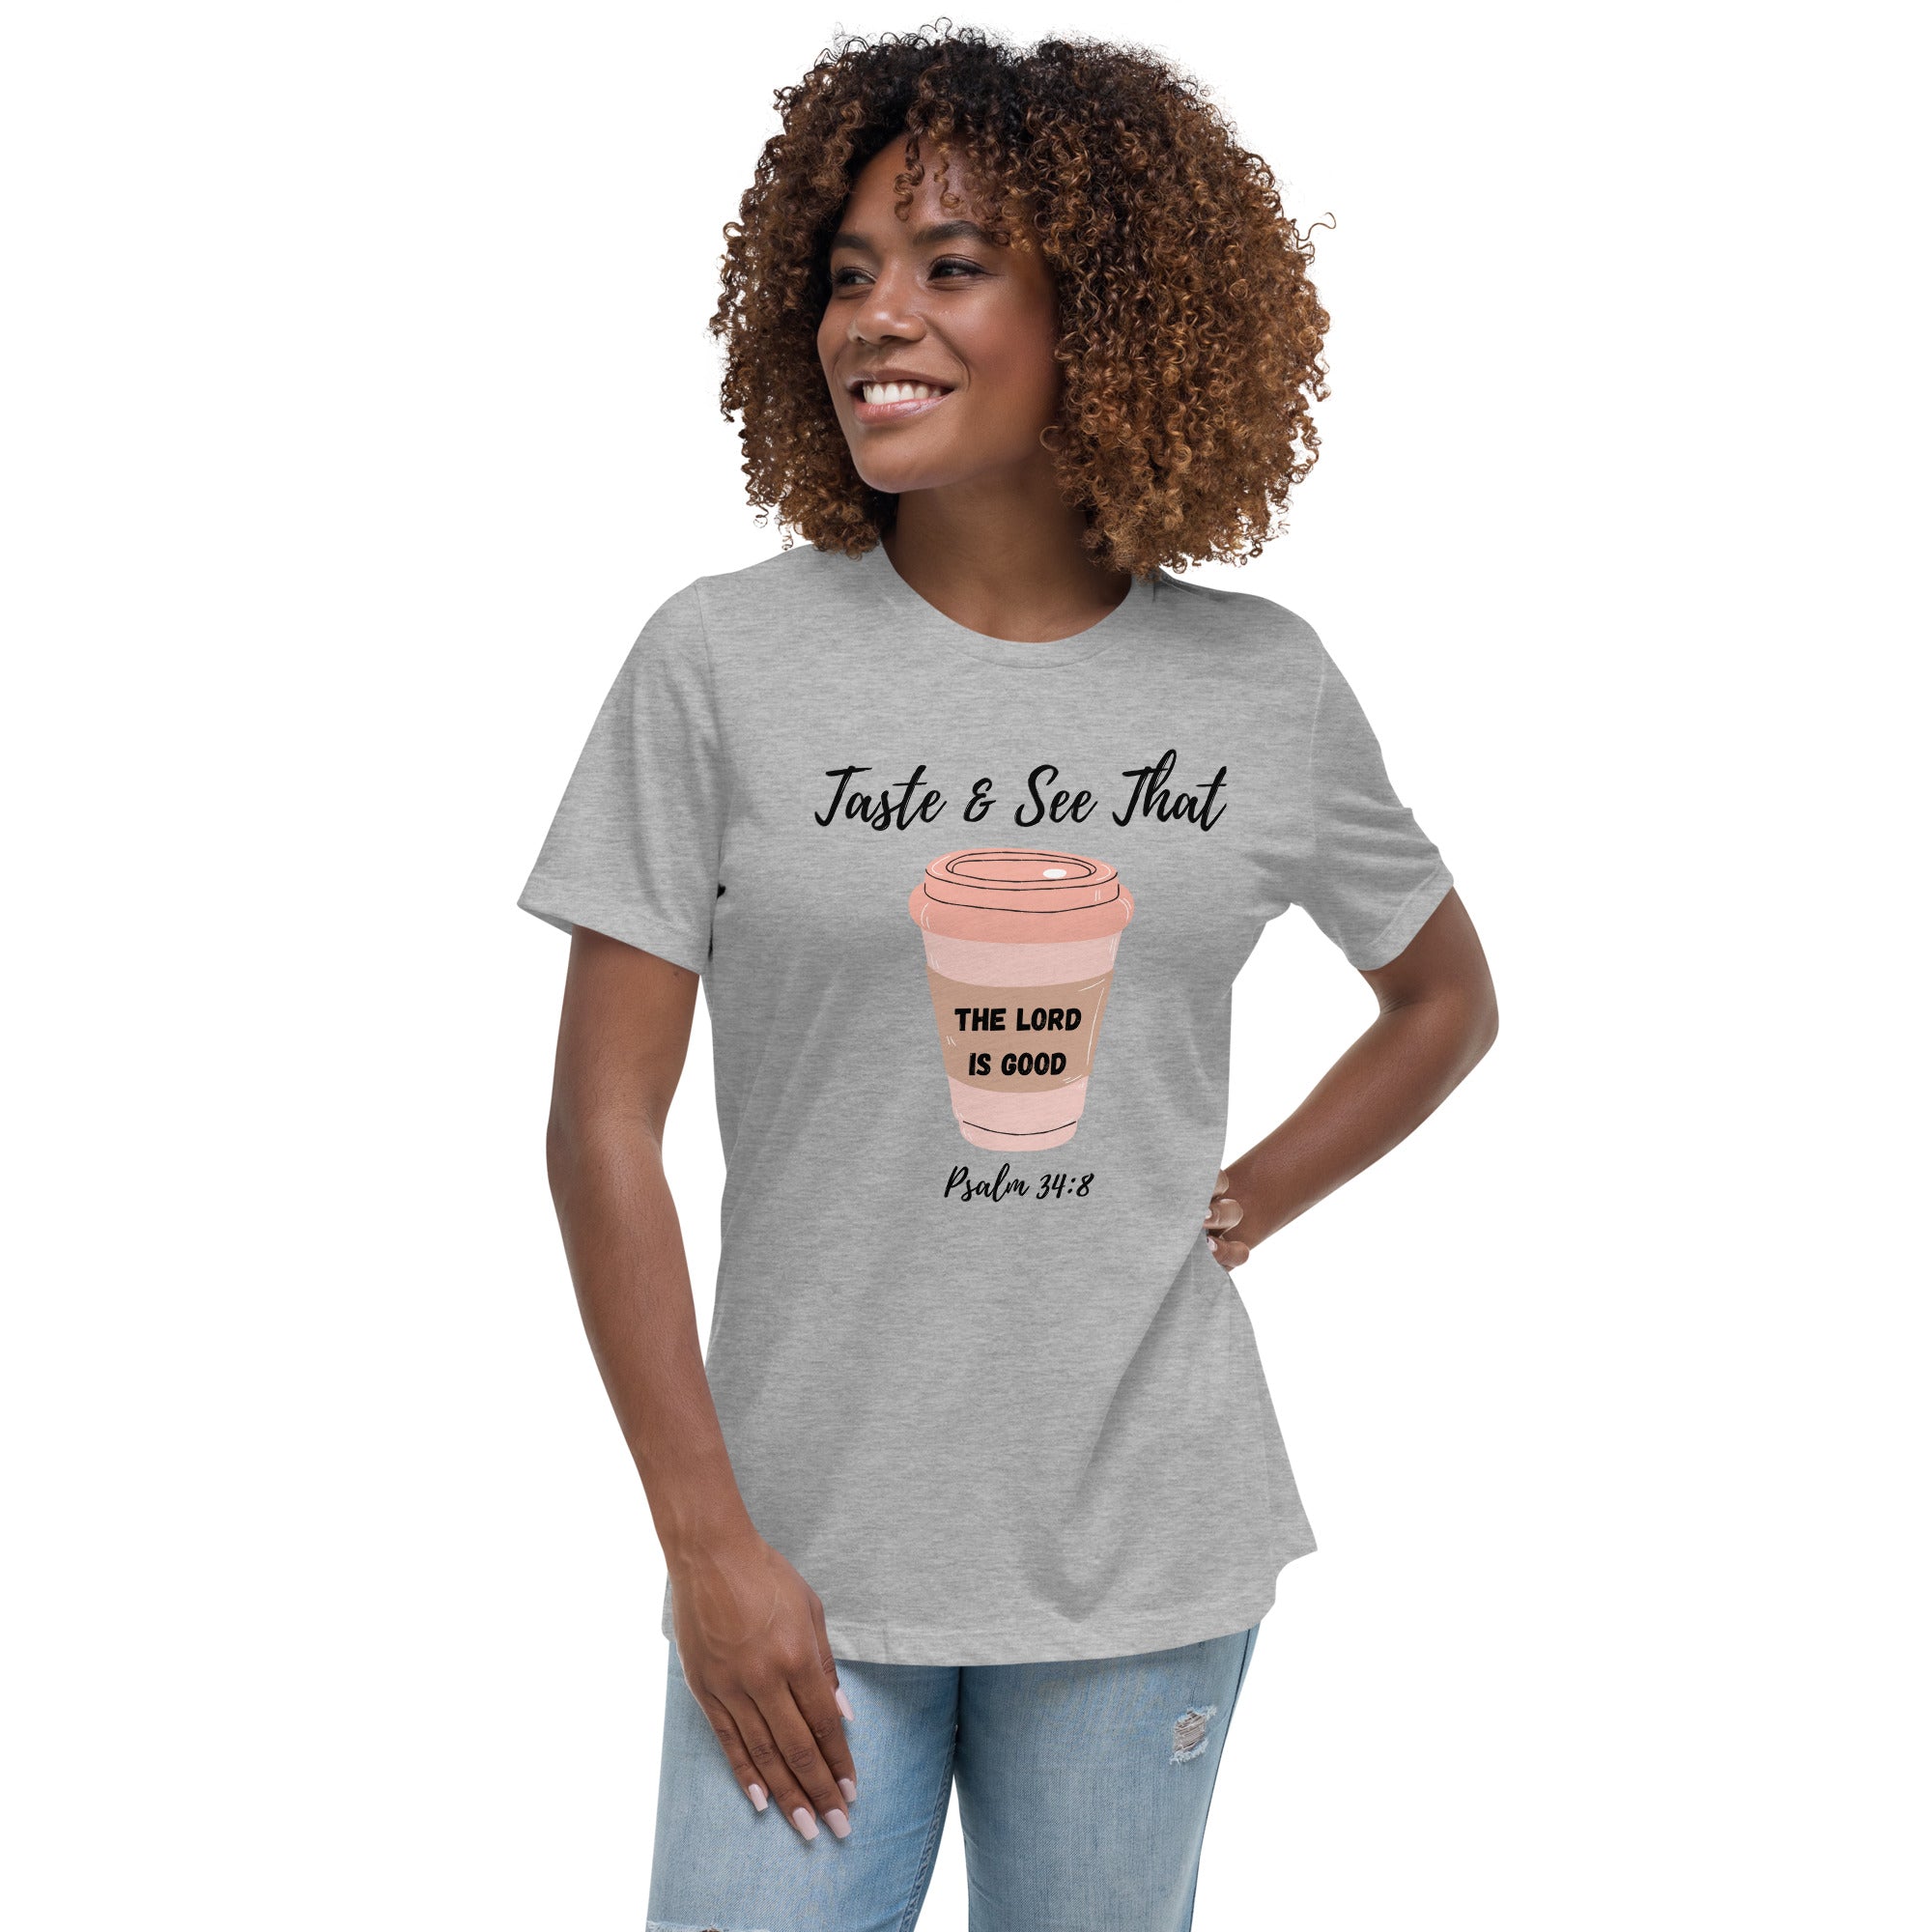 The LORD is Good Women's Relaxed T-Shirt